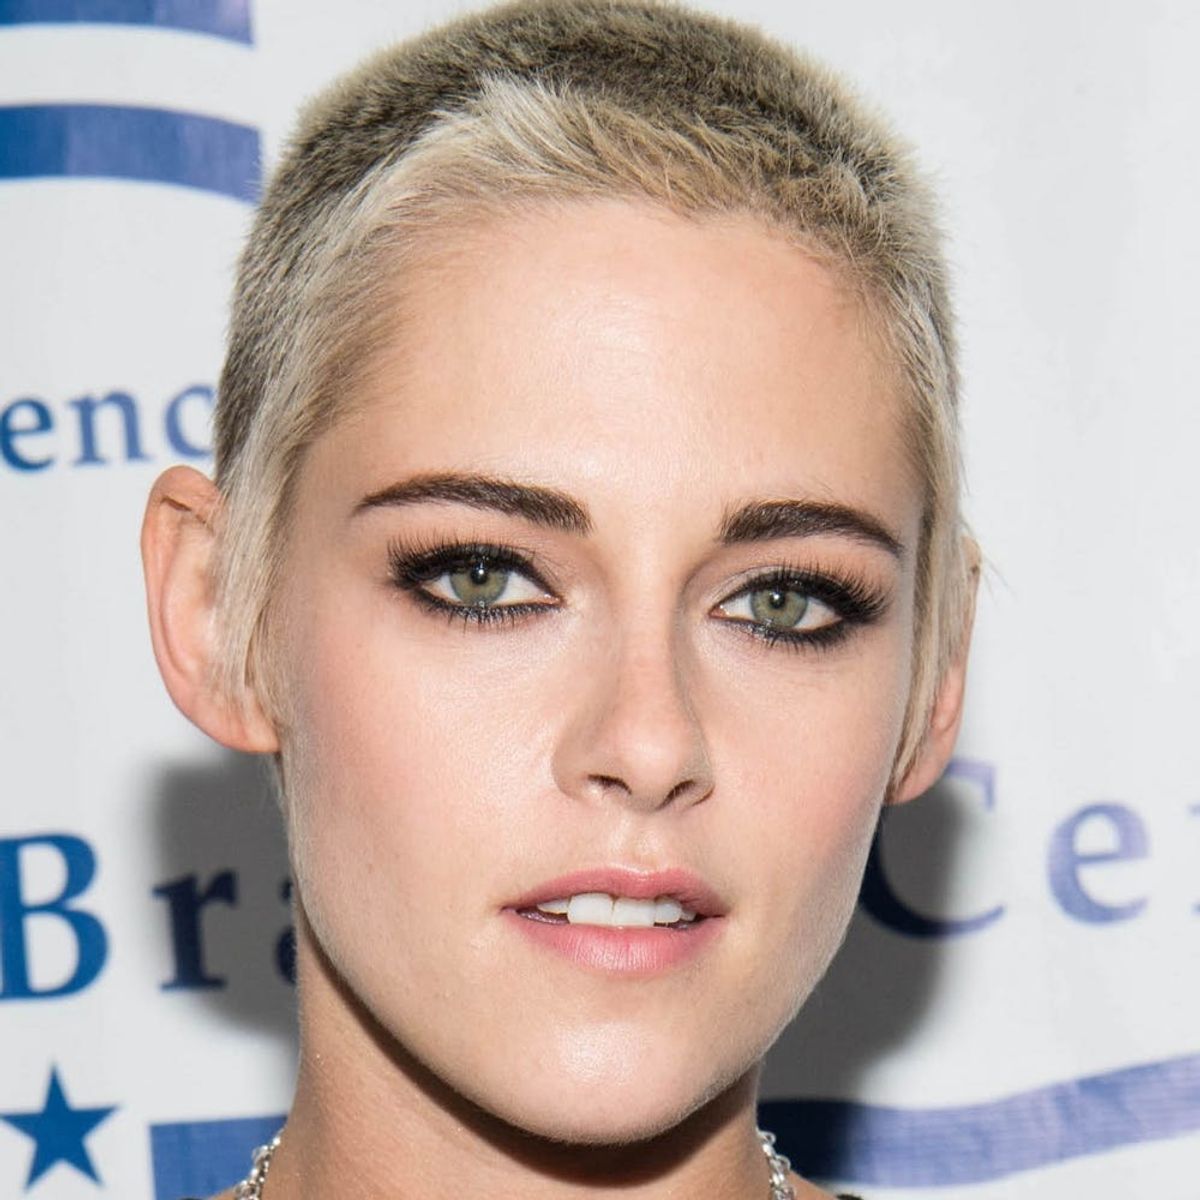 Kristen Stewart Just Threw Back to the ‘90s and Got Frosted Tips